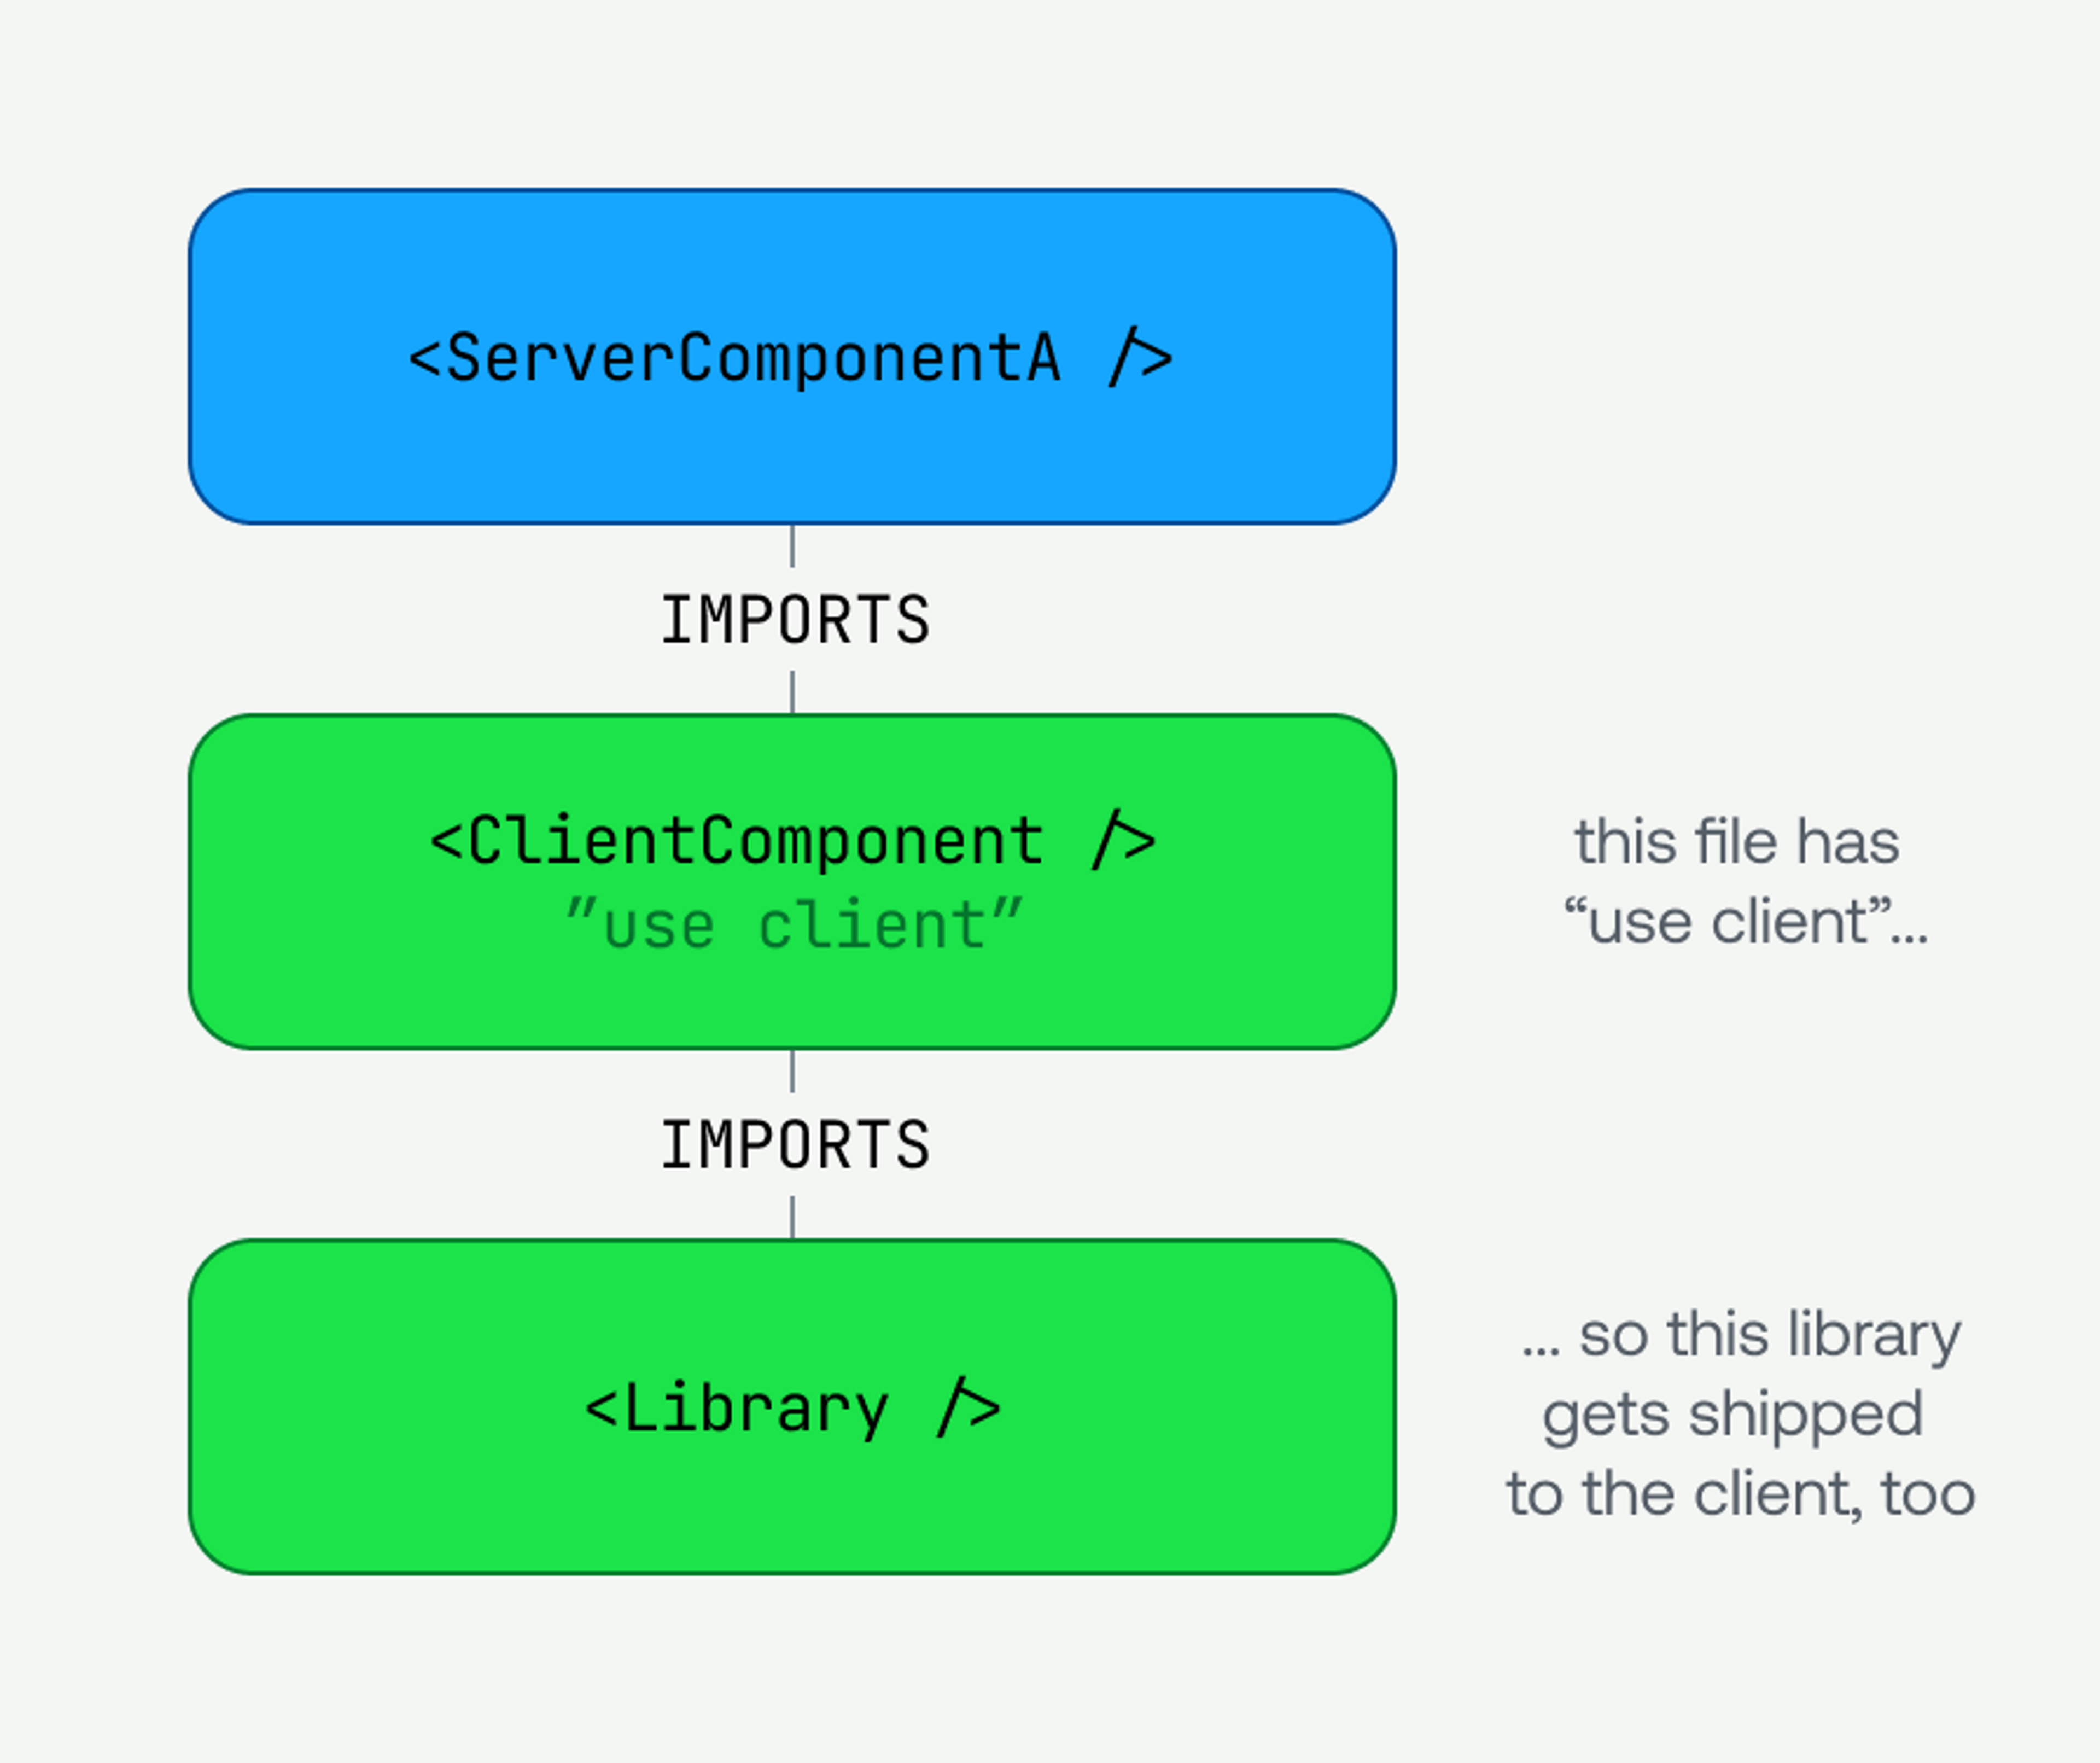 You can convert a library to a Client Component by importing it from another Client Component.